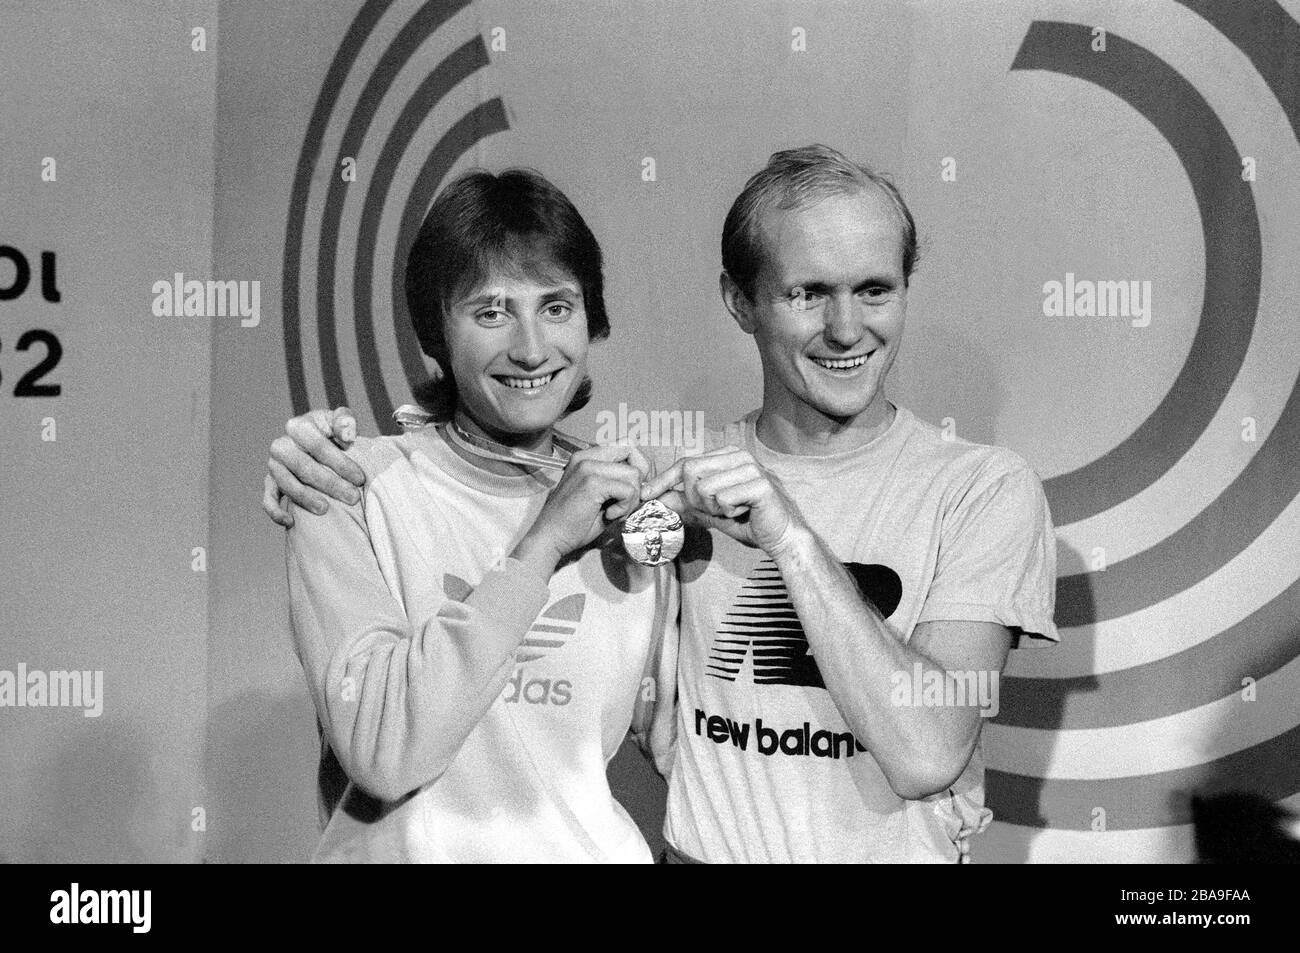 ANN-LOUISE SKOGLUND Swedish track and field athlete who won 400 m hurdle in European championship in Athens Greece 1982 and is congratulated by Bo Gustavsson Swedish participant in walk 50 km and bronze medal Stock Photo